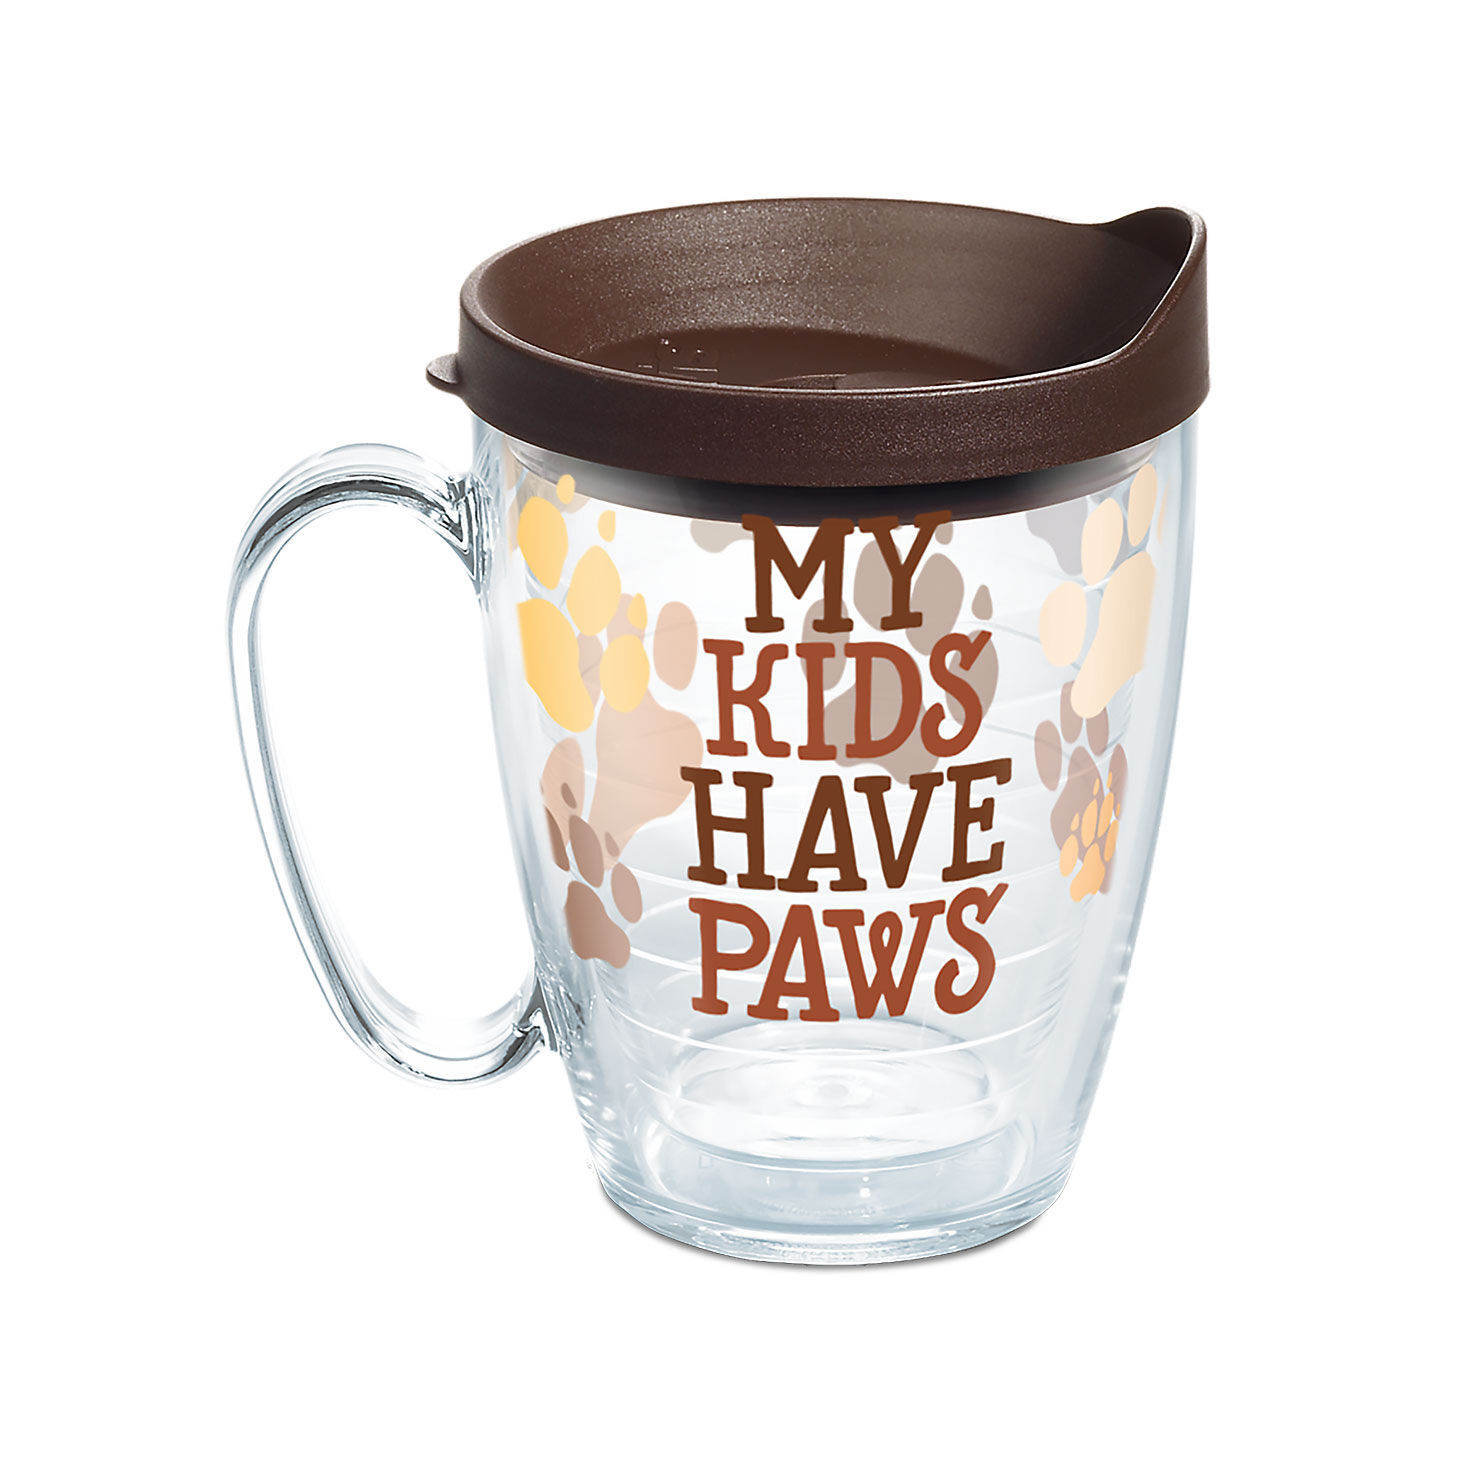 Tervis My Kids Have Paws Mug, 16 oz. for only USD 14.99 | Hallmark